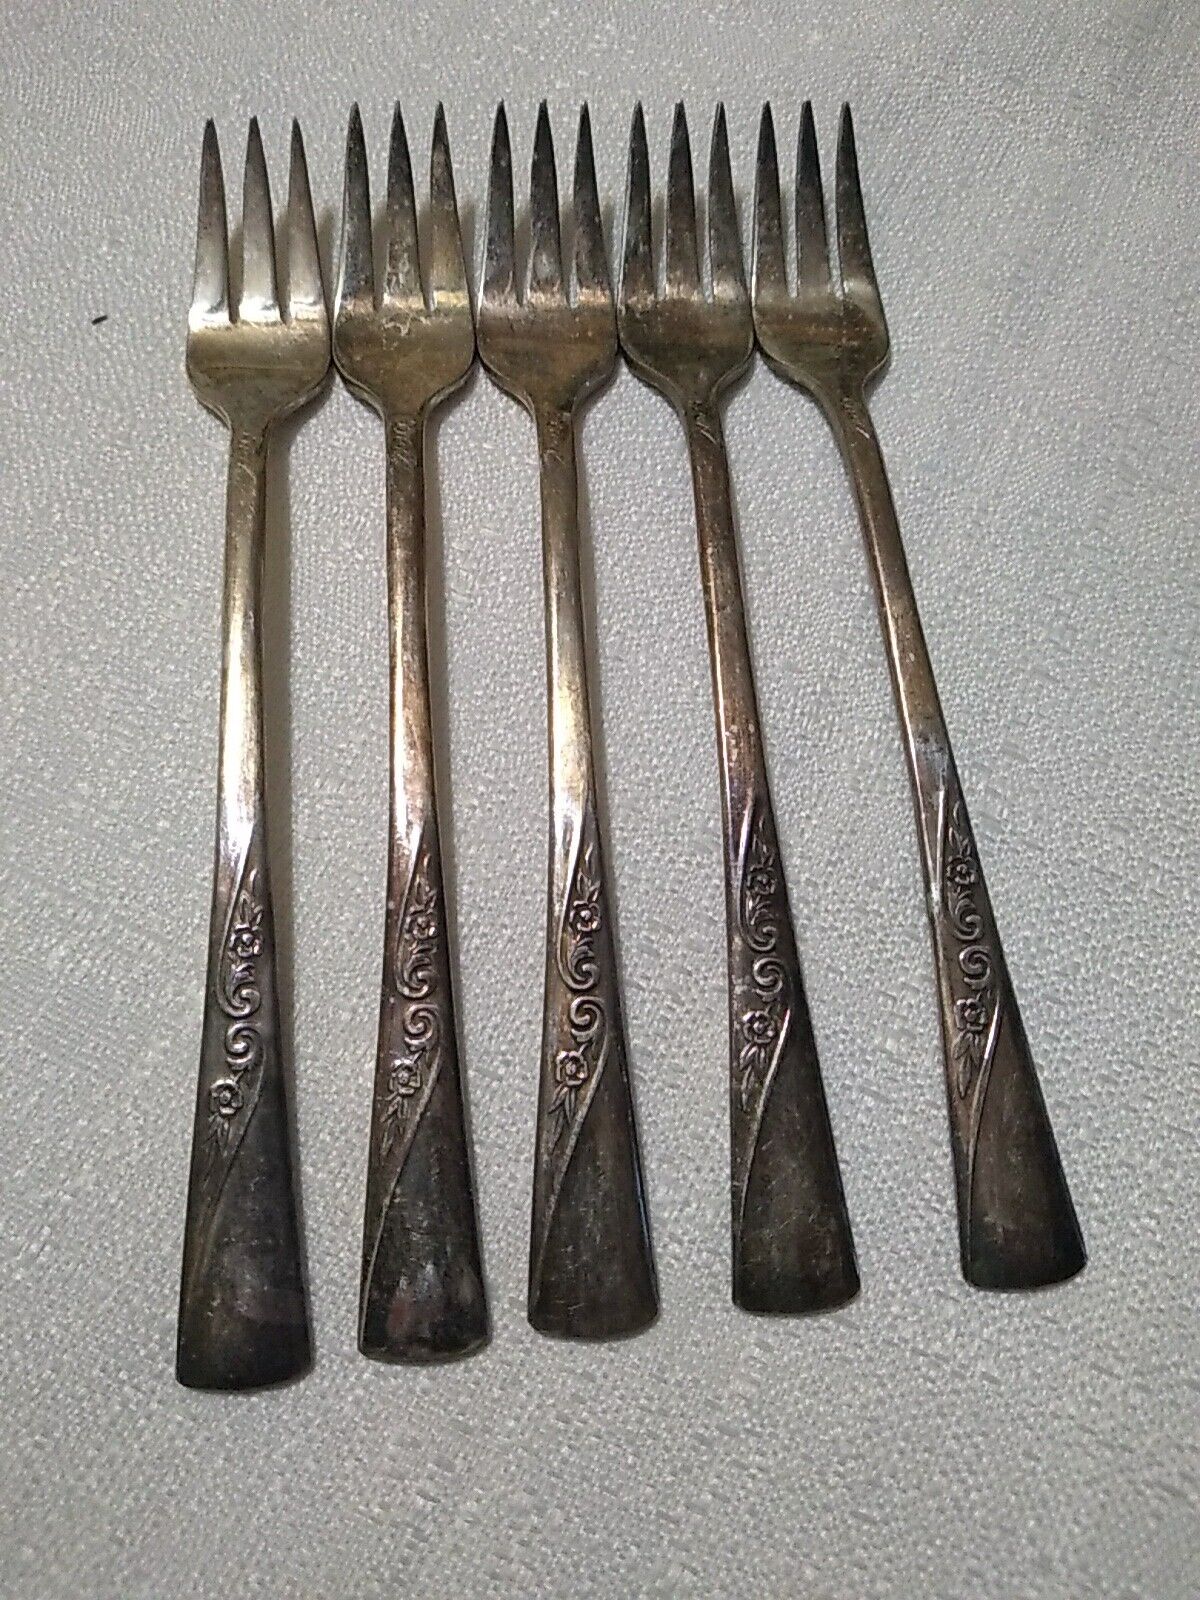 Revelation Silver Plate Cocktail Seafood Forks Lot Of 5 Silverware 